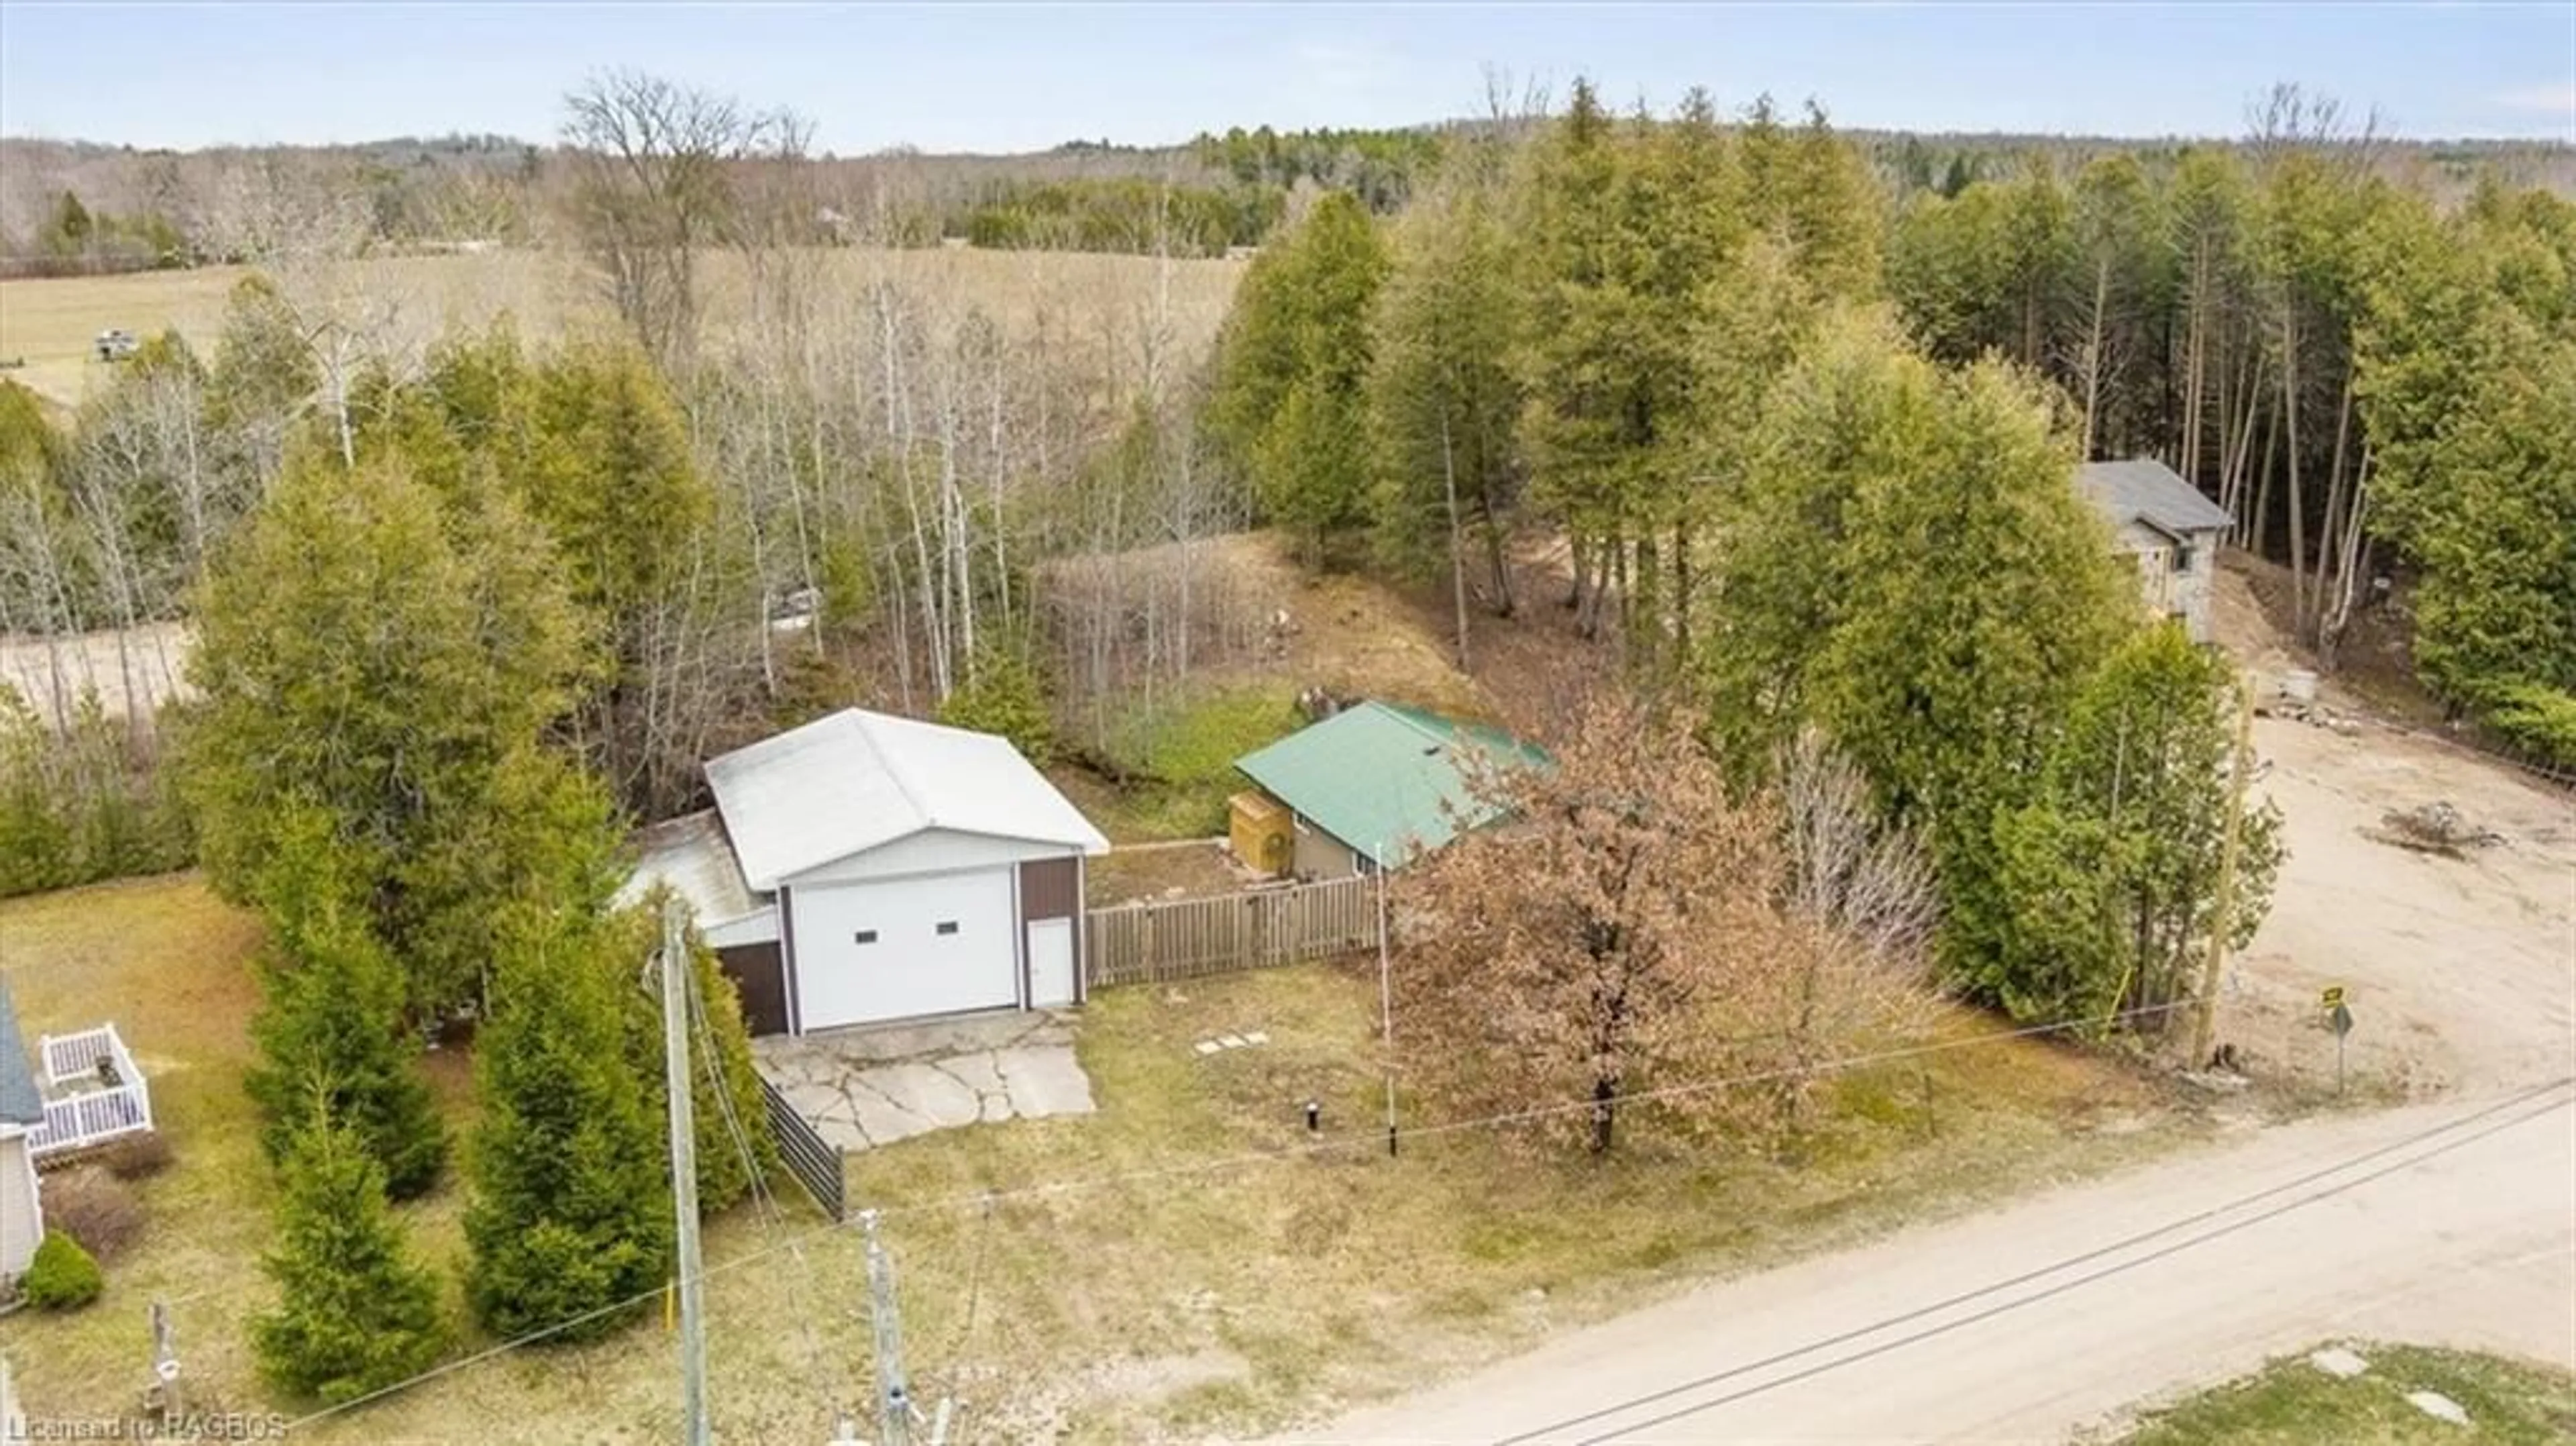 Shed for 251 Mccullough Lake Dr, Williamsford Ontario N0H 2V0